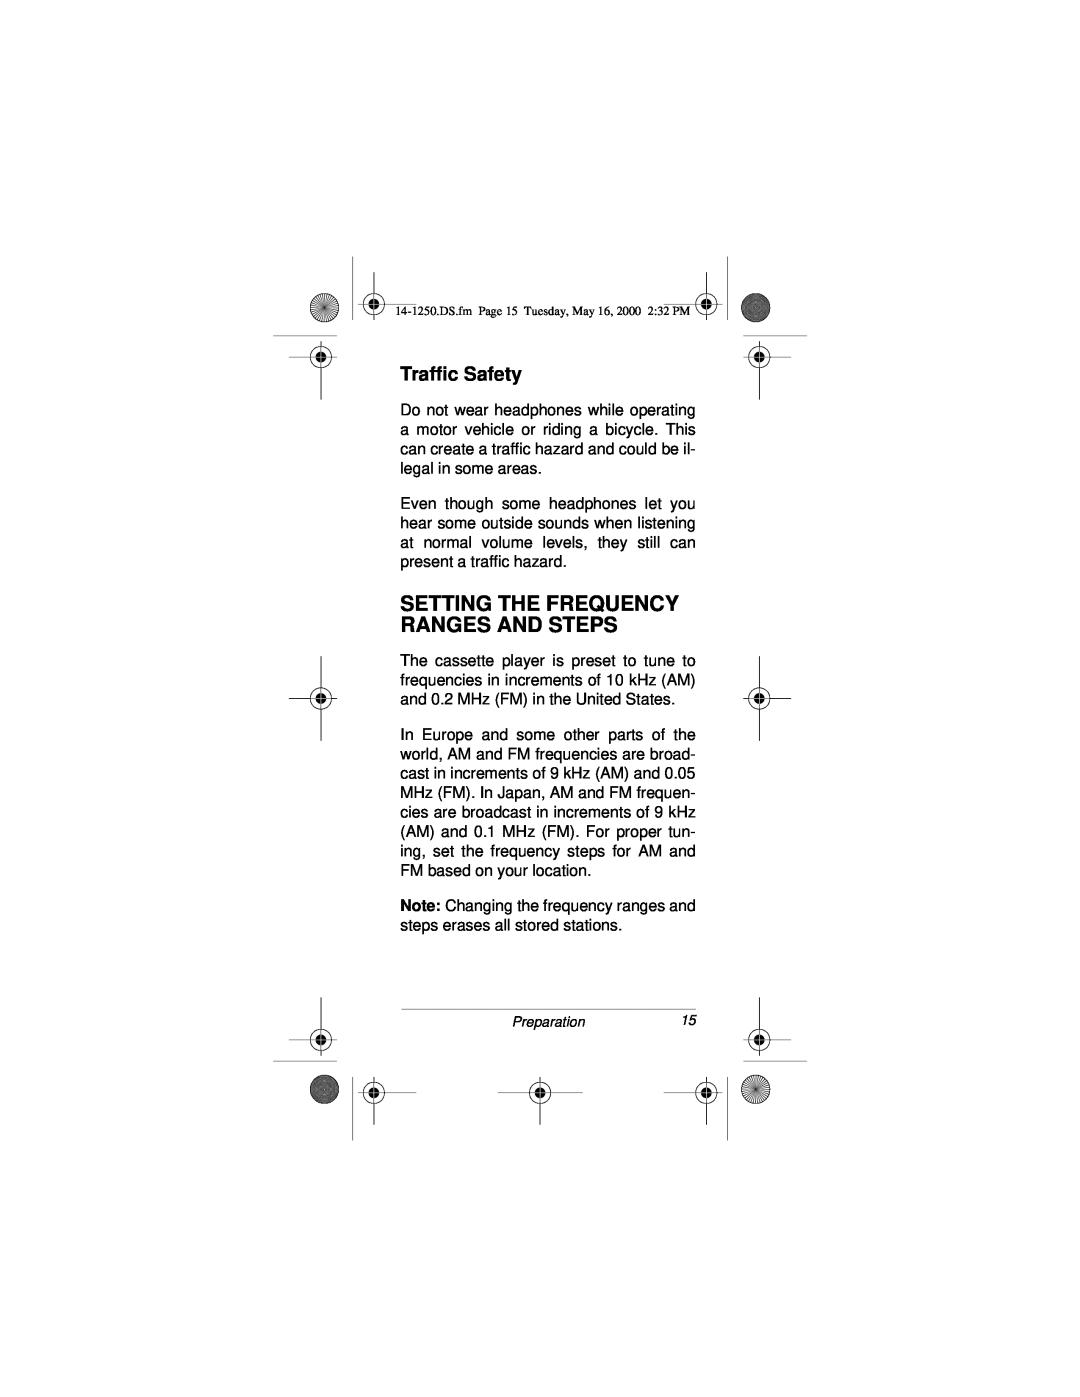 Radio Shack SCP-107 owner manual Setting The Frequency Ranges And Steps, Traffic Safety 